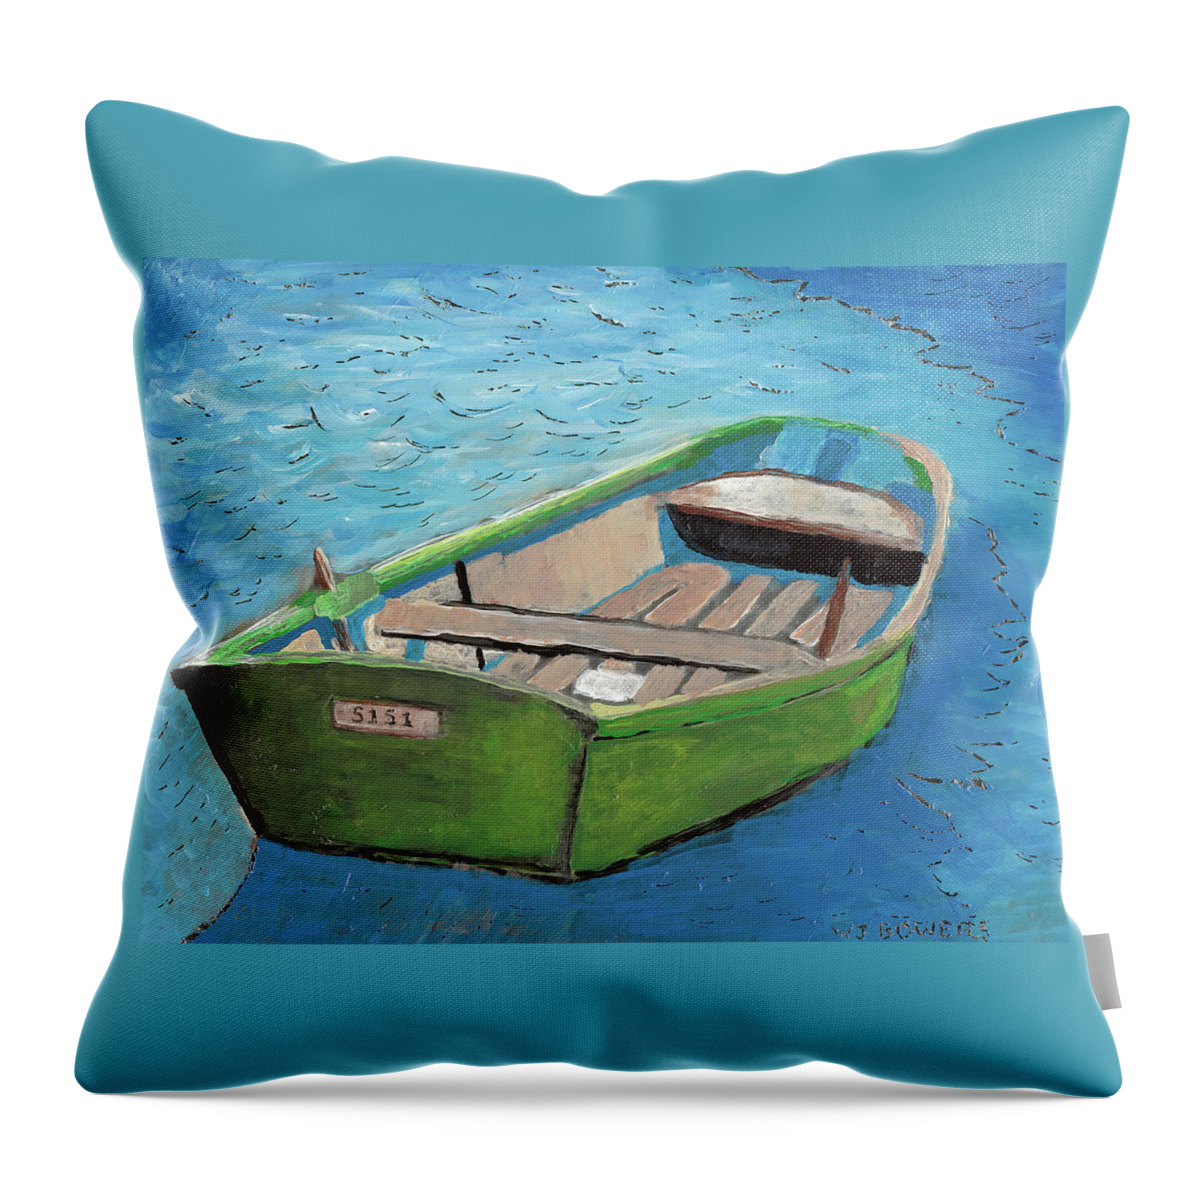 Rowboat Throw Pillow featuring the painting The Green Rowboat by William Bowers